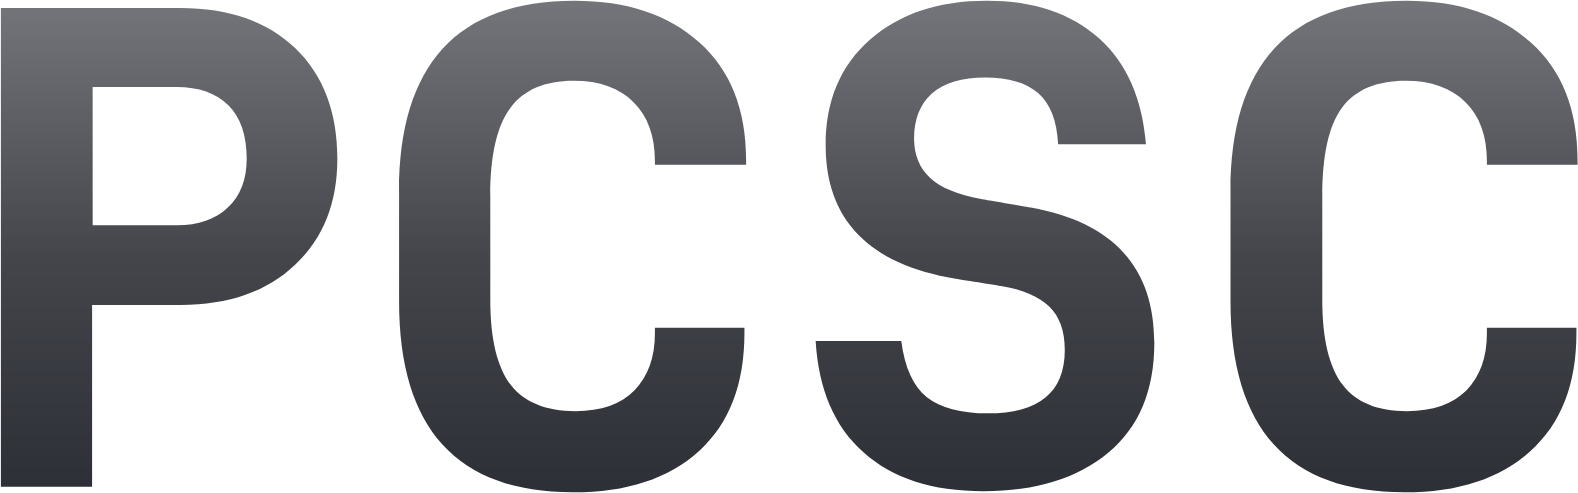 President Chain Store (PSCS) logo (transparent PNG)